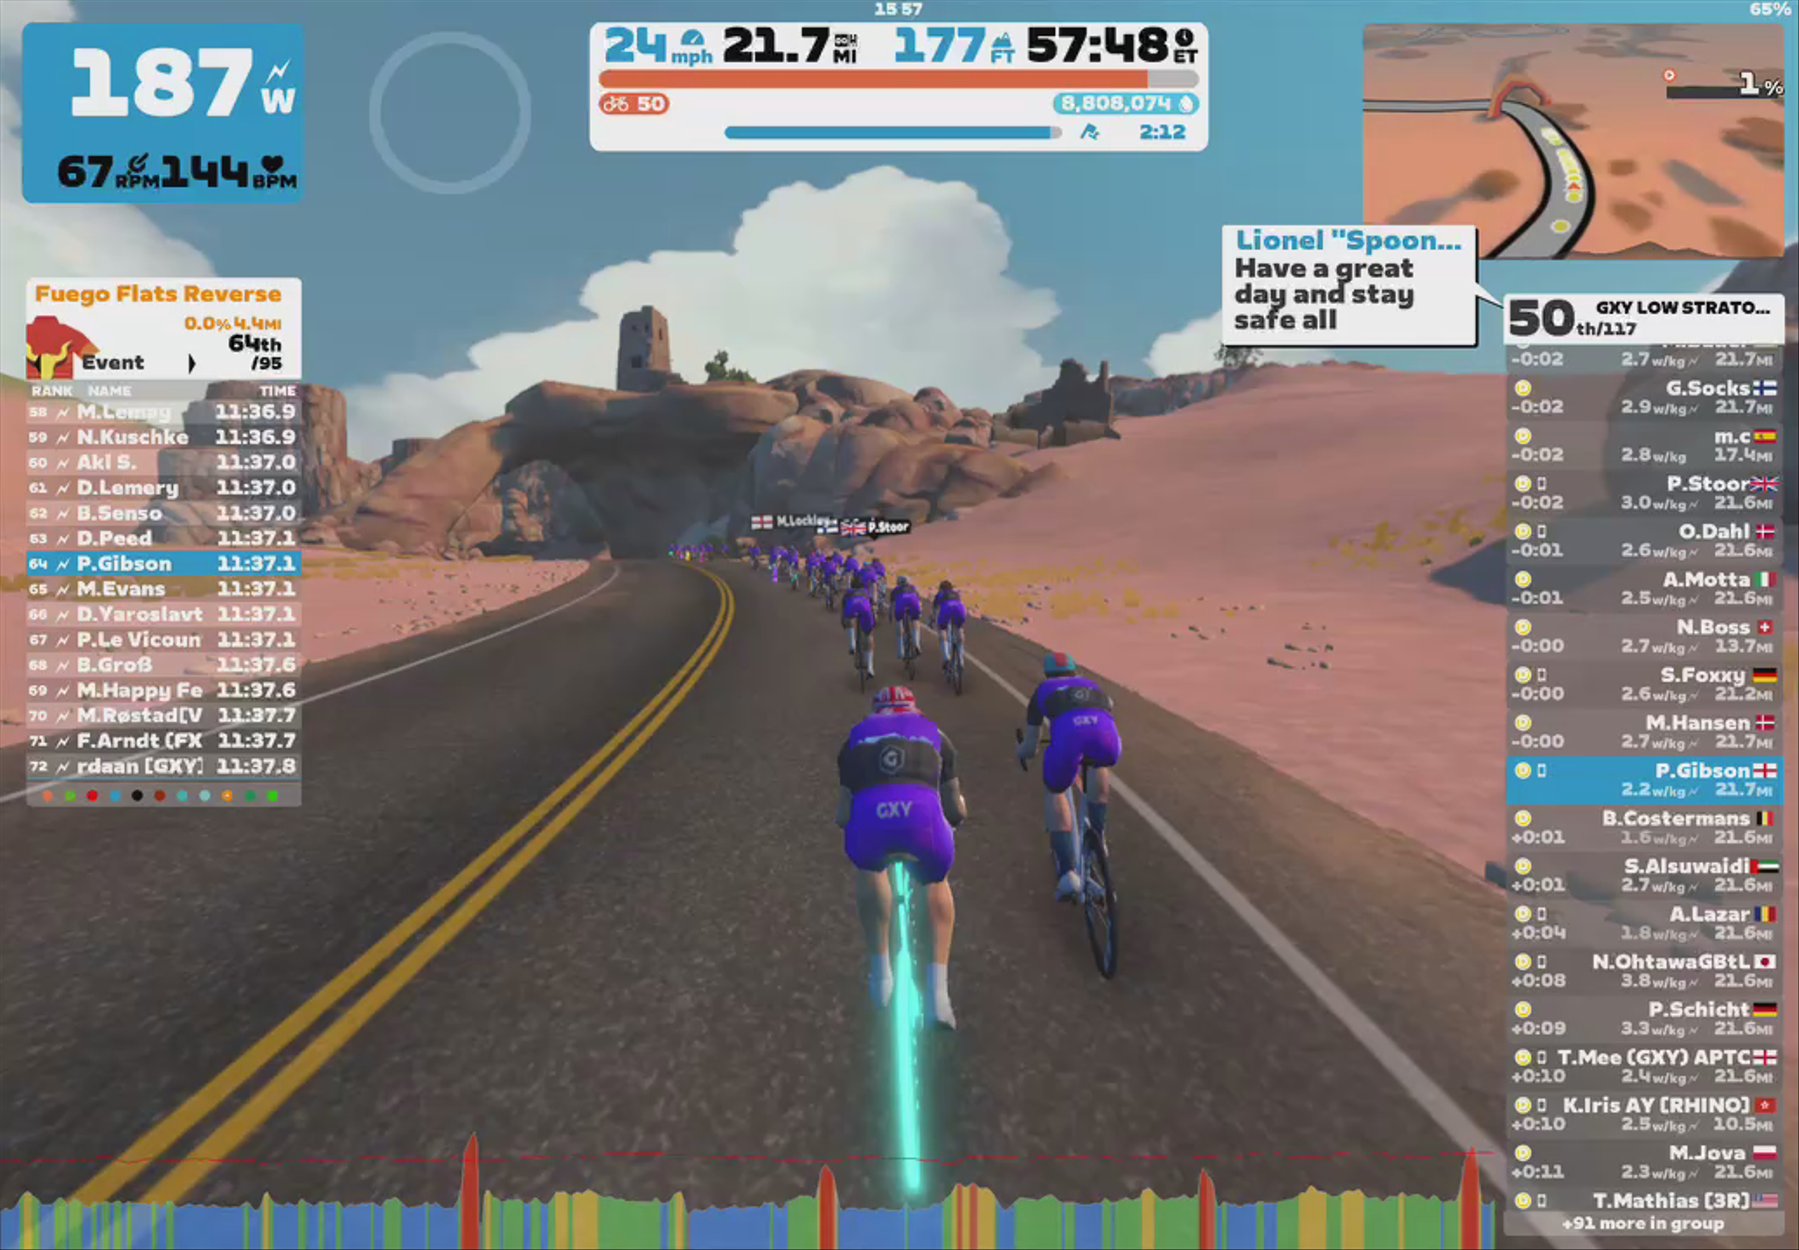 Zwift - Group Ride: GXY LOW STRATOSPHERE [1.9-2.3wkg] – CAT D (D) on Tempus Fugit in Watopia